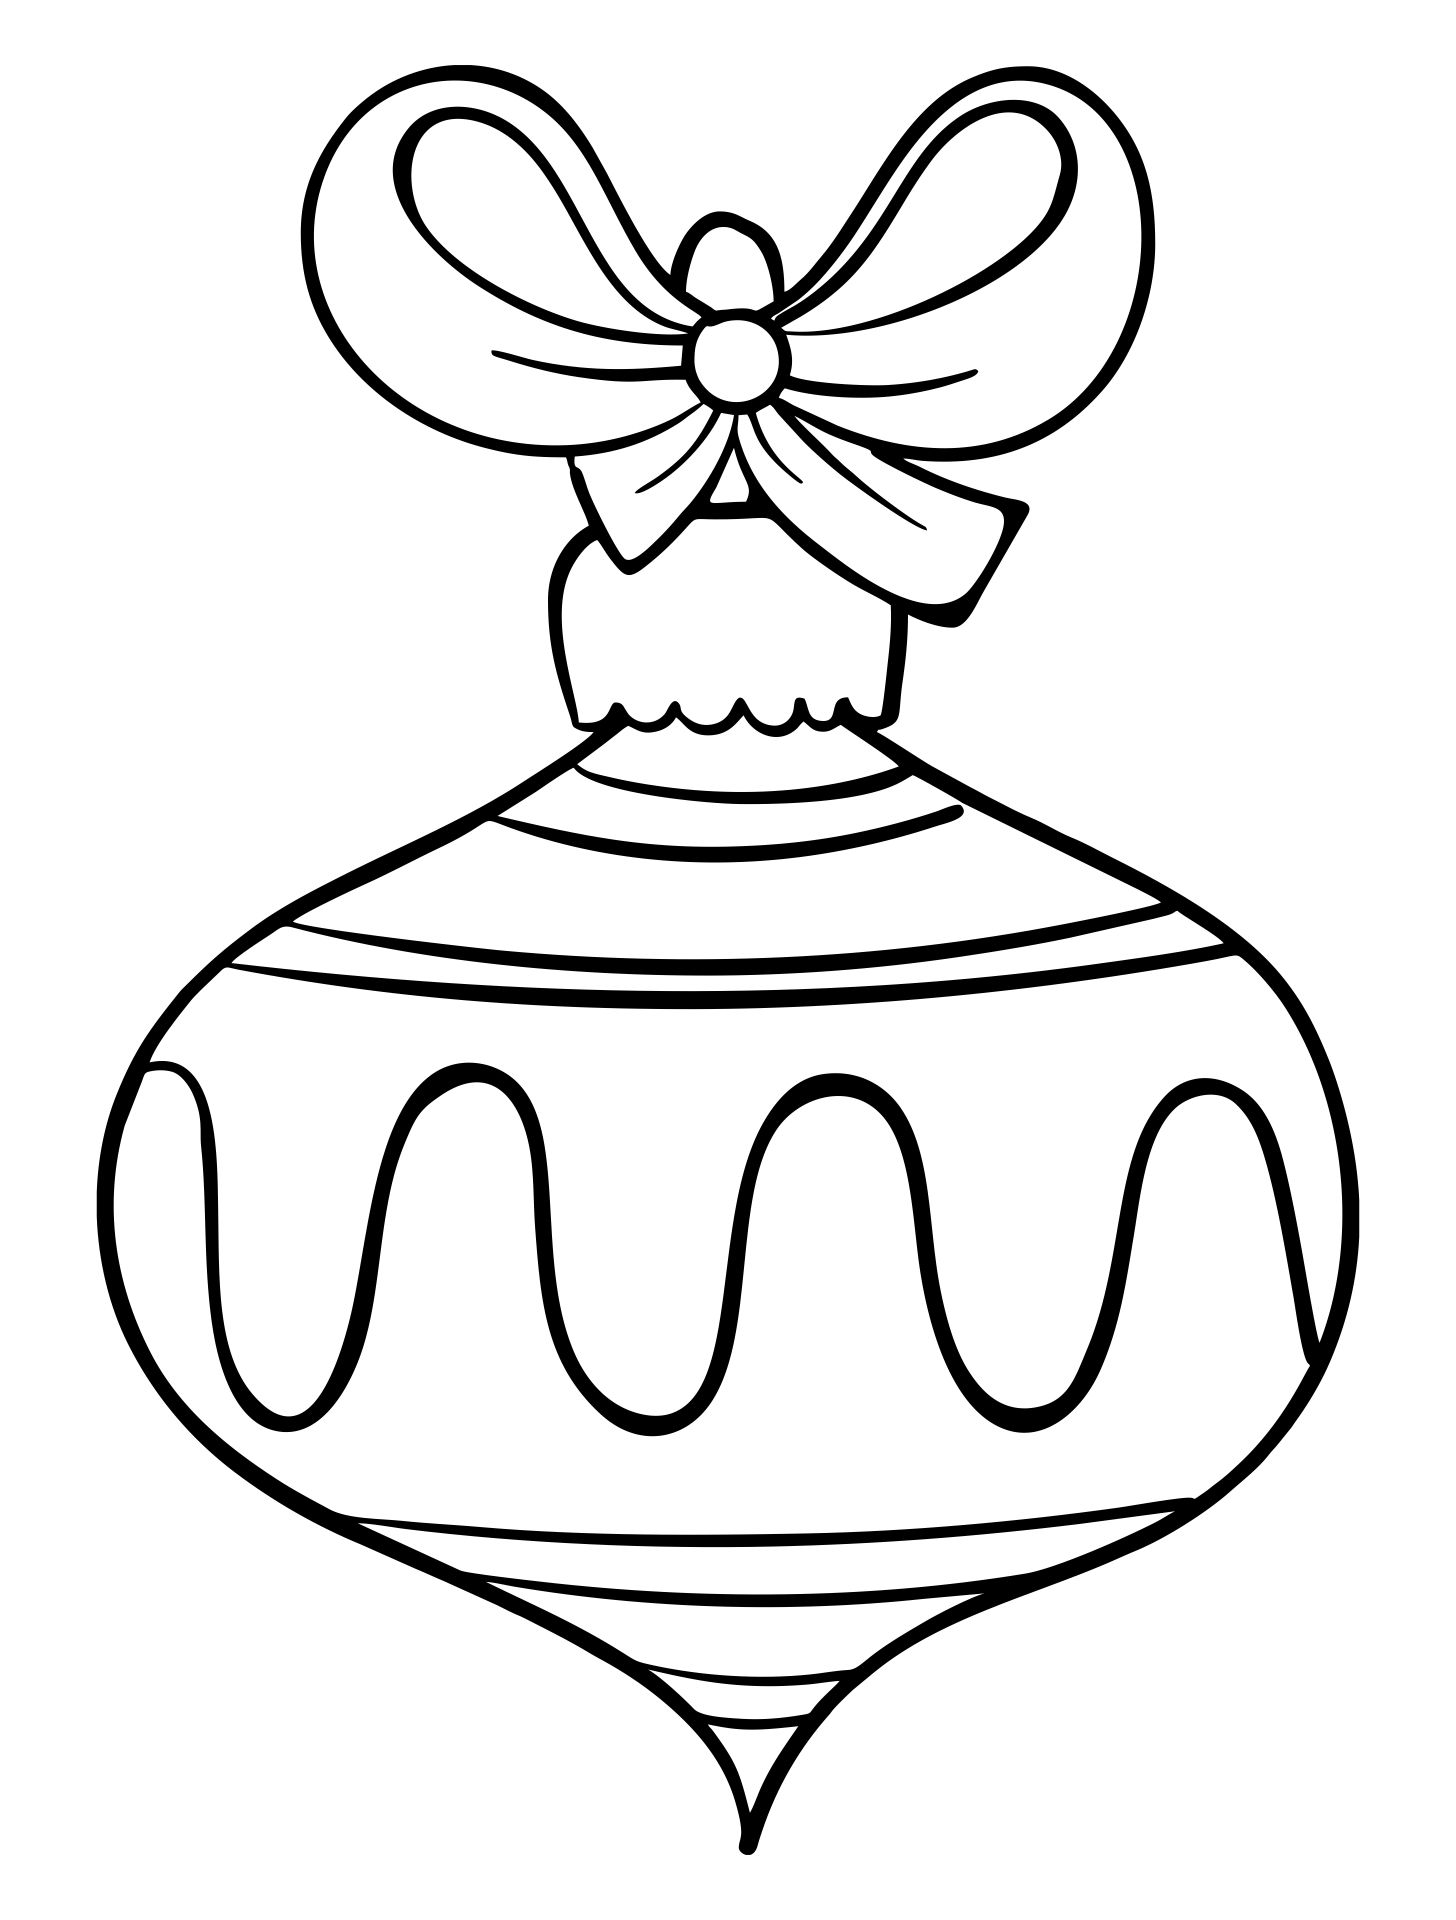 Coloring Pages Of Christmas Ornaments Home Design Ideas